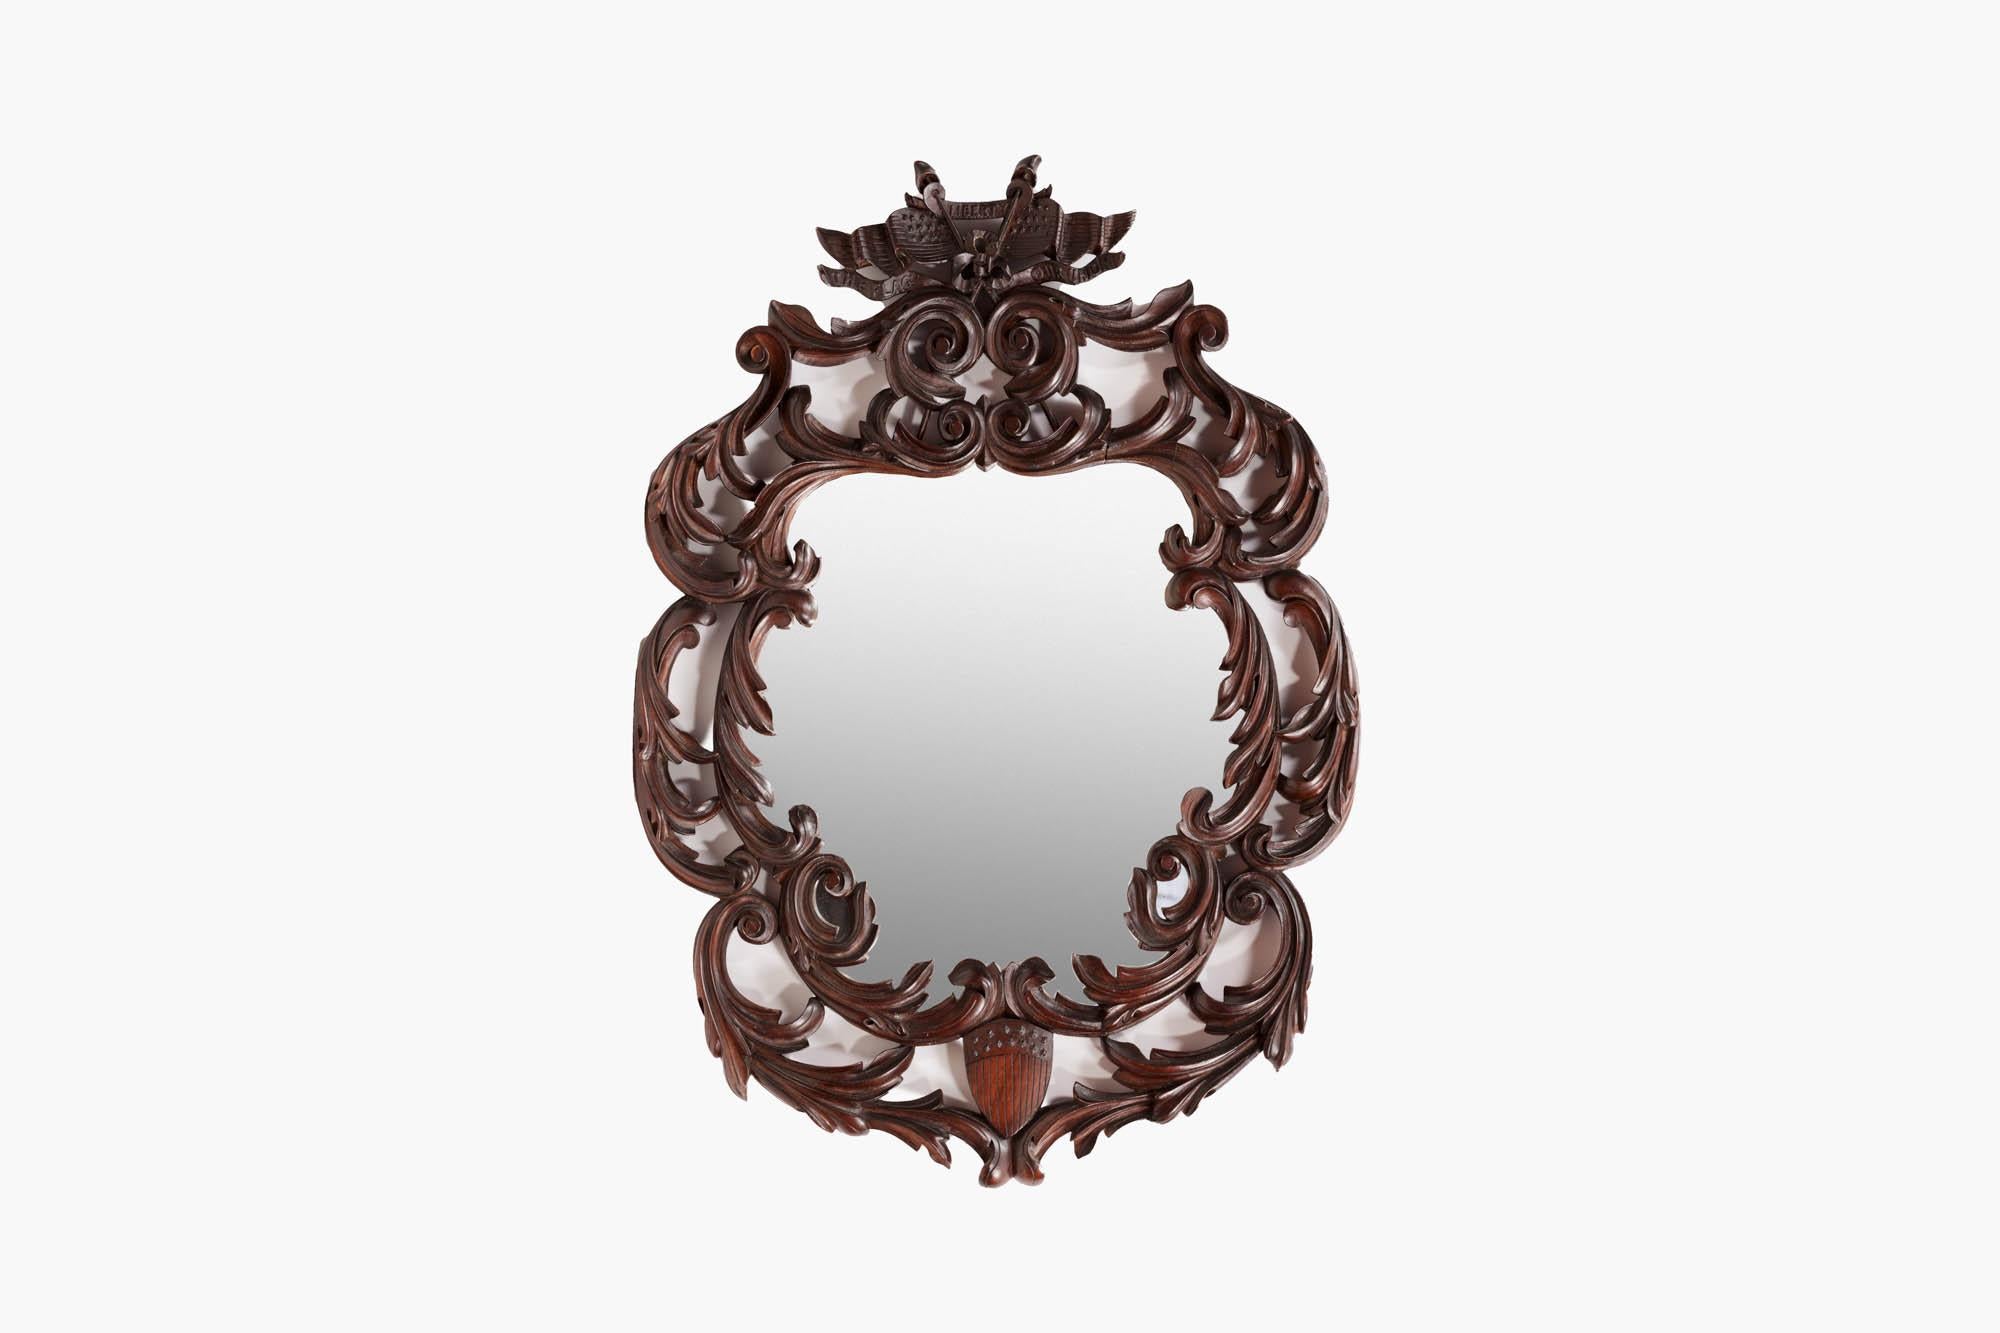 19th century English mirror in the Americanised fashion. The shaped glass plate sits within a heavily carved dark wood frame with foliate scrolling along with a crossed flag emblem at the top and shield detailing at the bottom. The slogan on the top